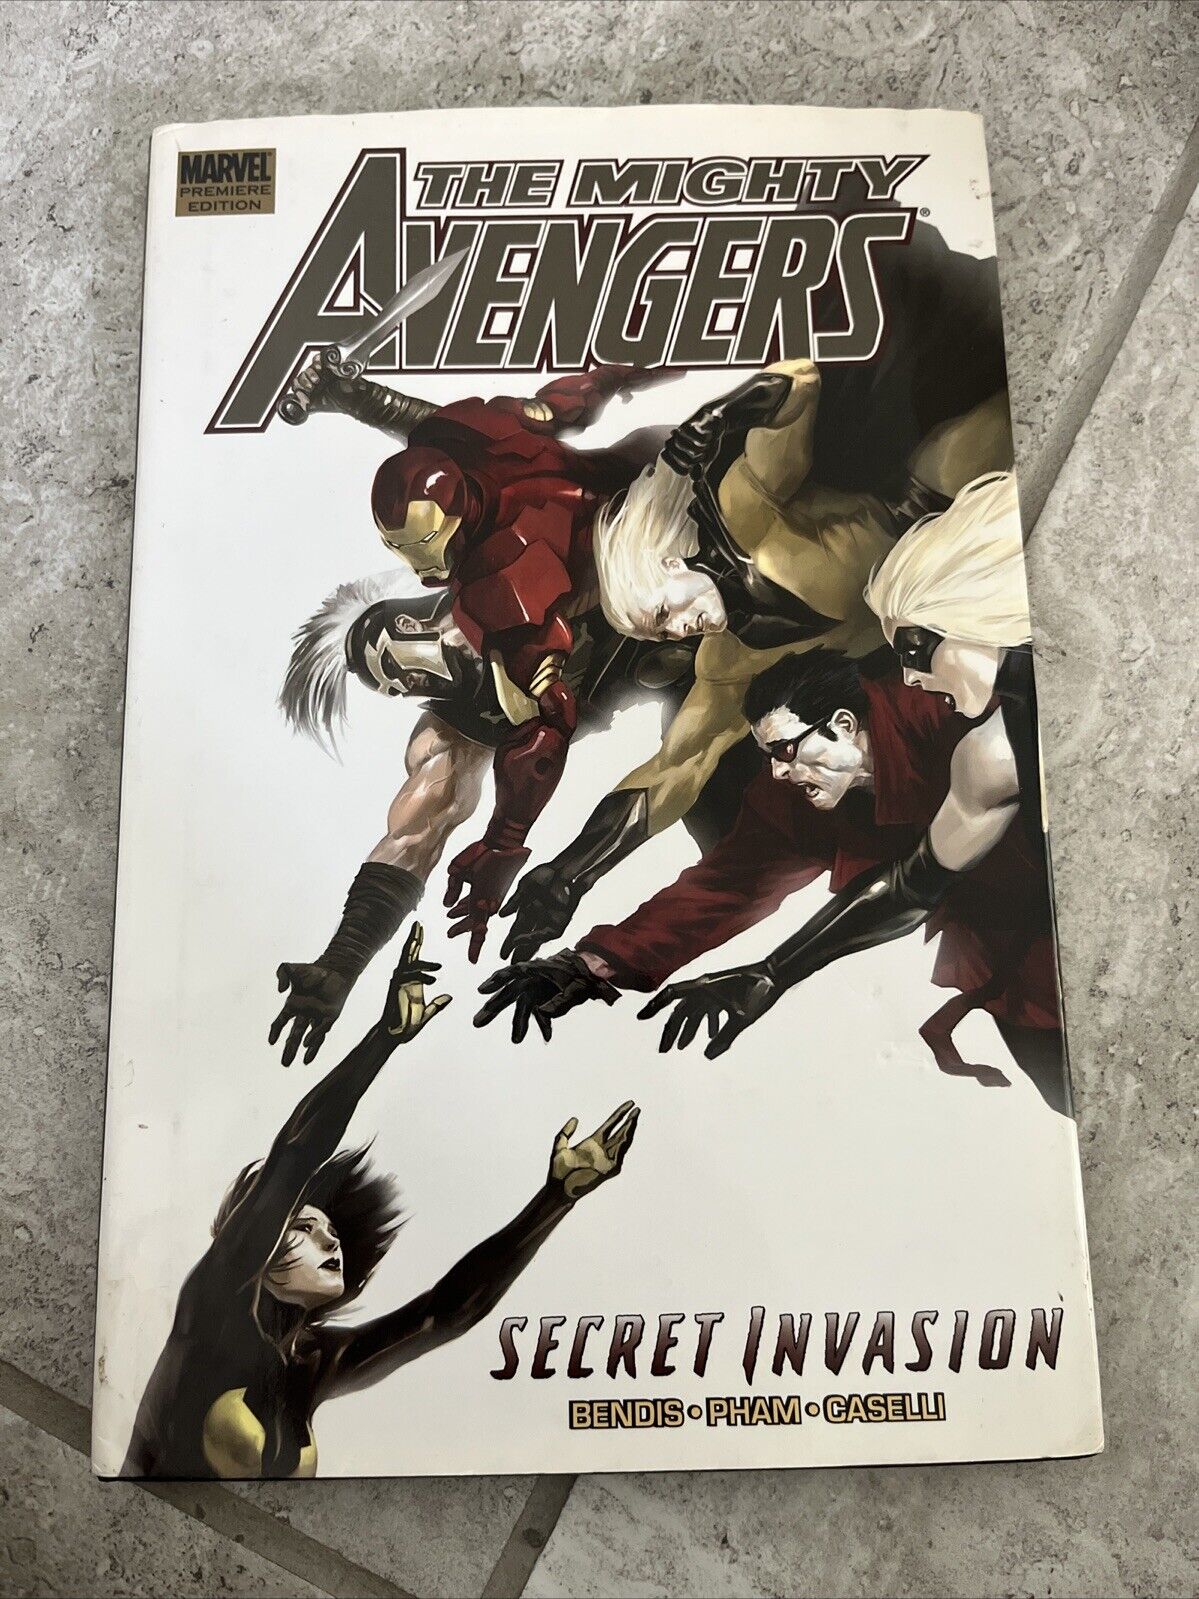 Mighty Avengers Vol. 4: Secret Invasion, Book 2 by Bendis, Marvel 2009, Hardcove